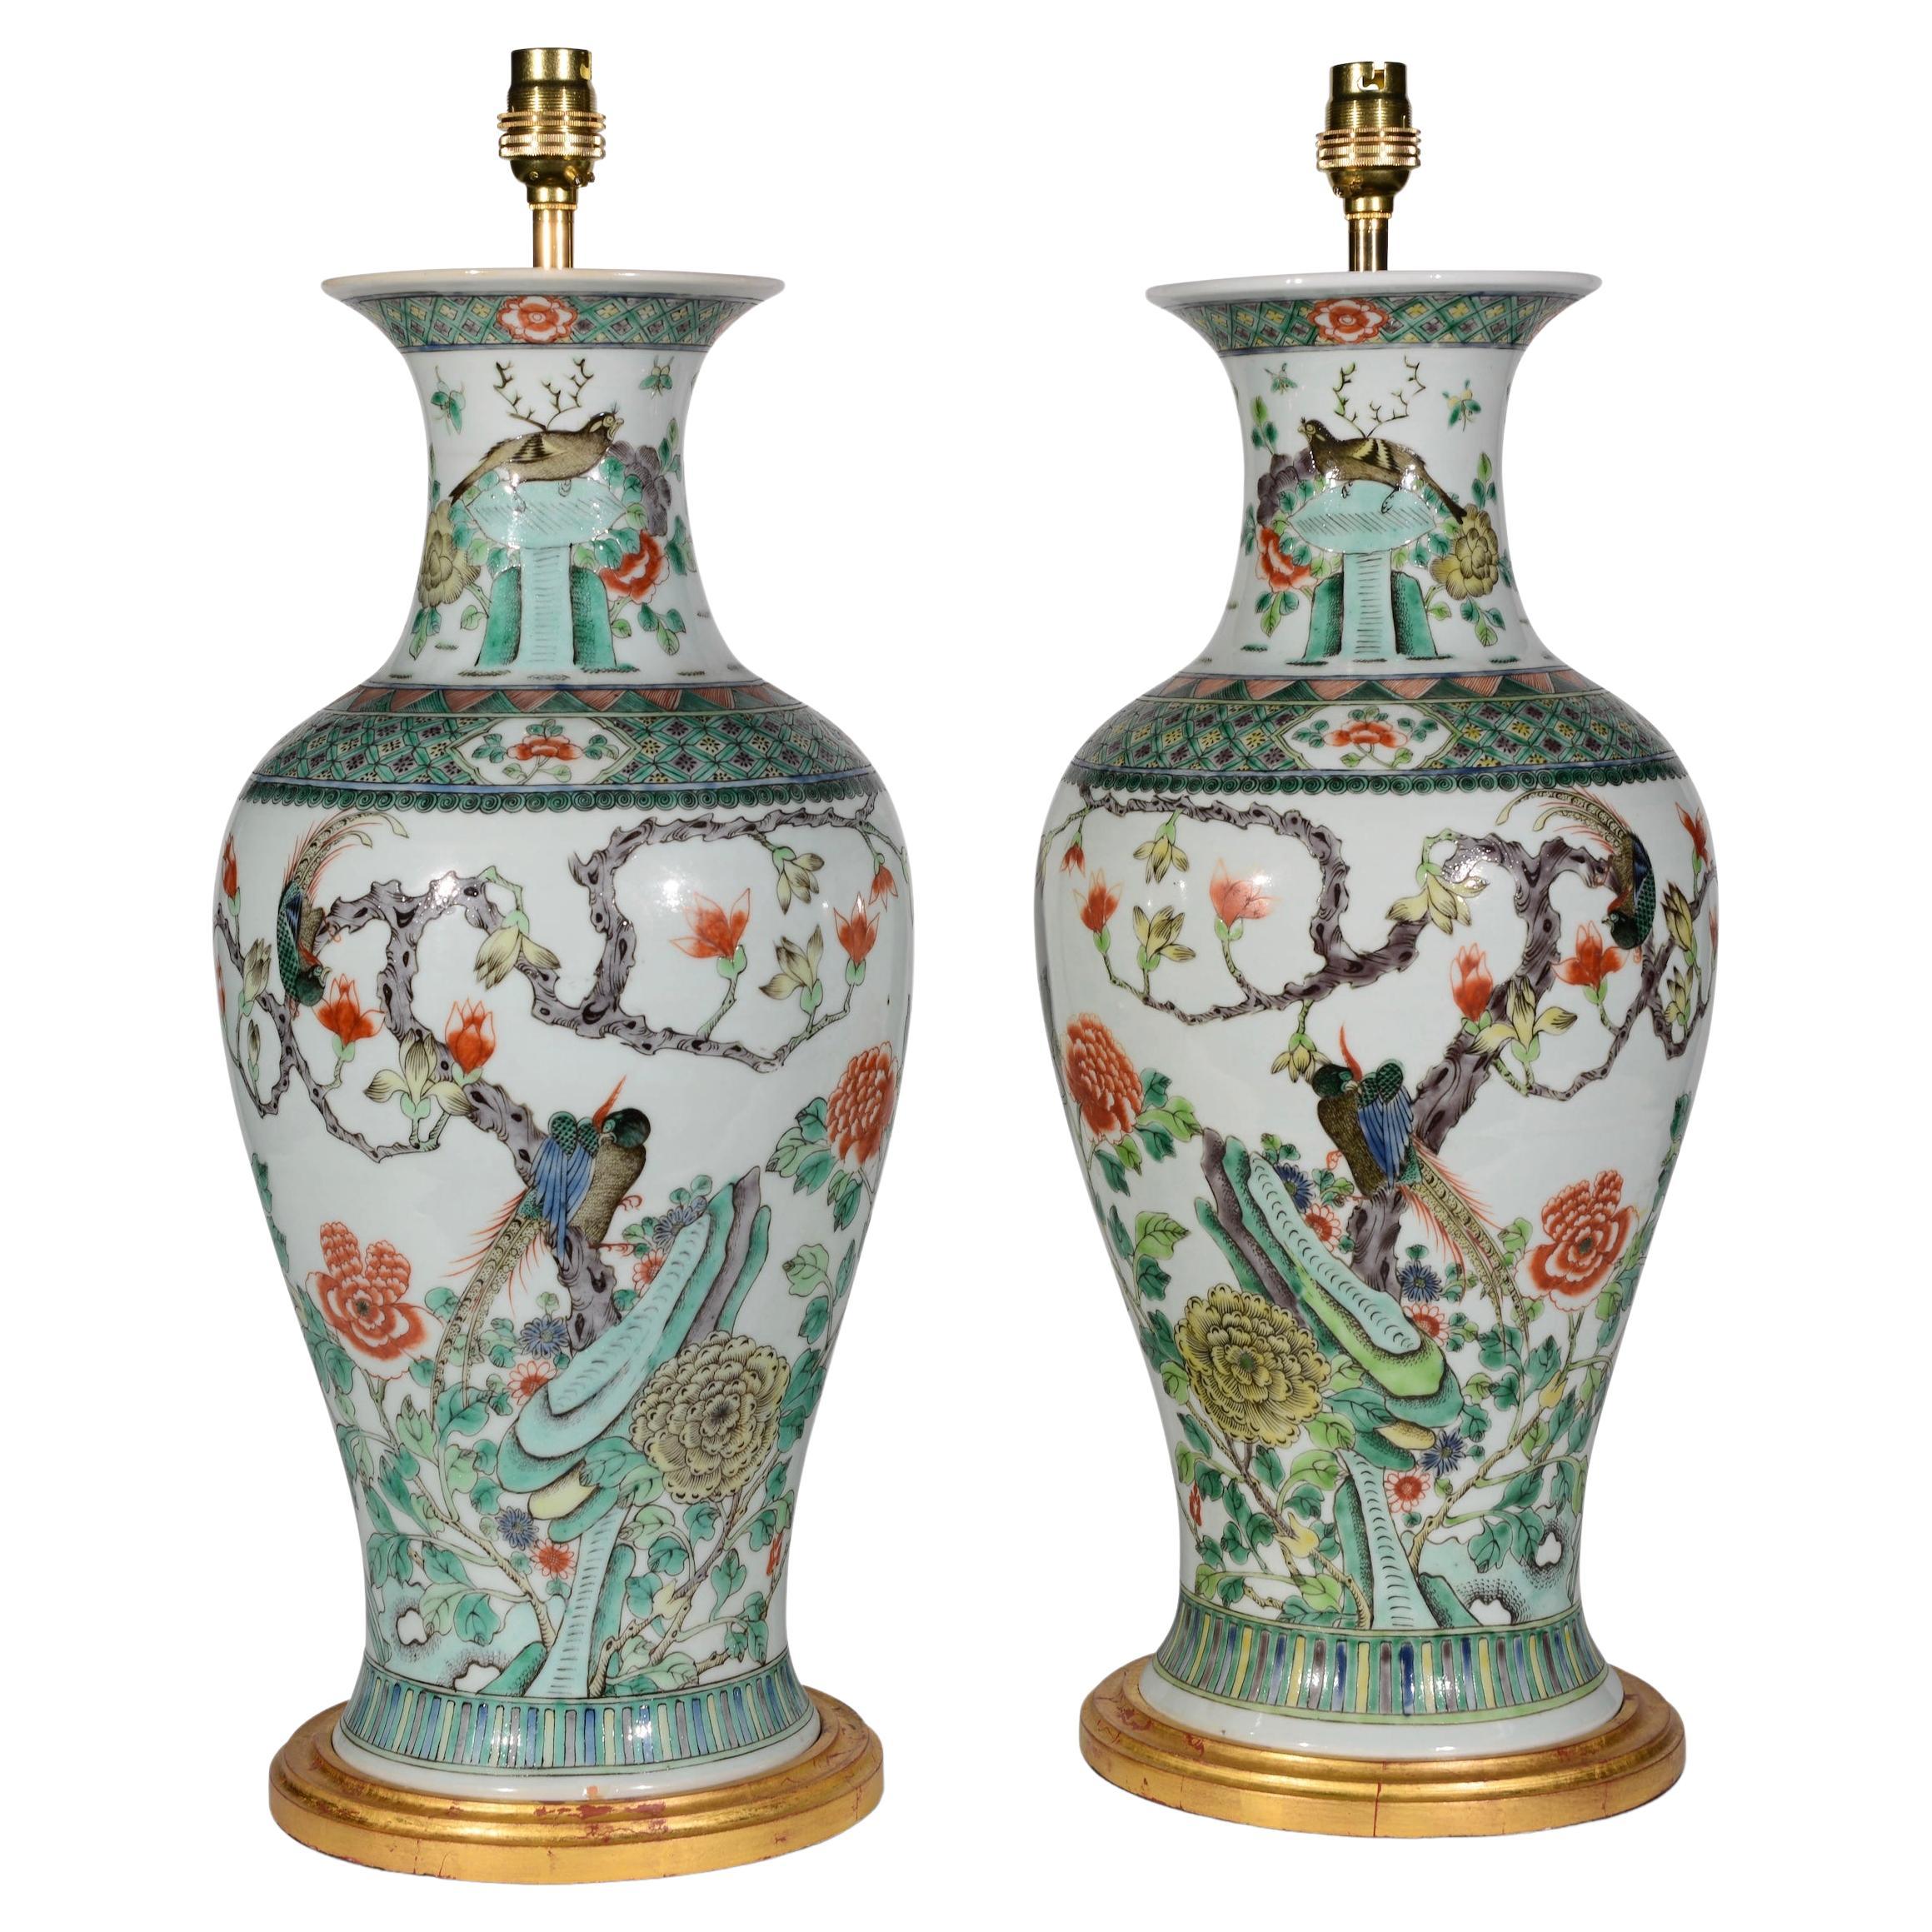 Pair of 19th Century Chinese Famille Verte Baluster Antique Table Lamps